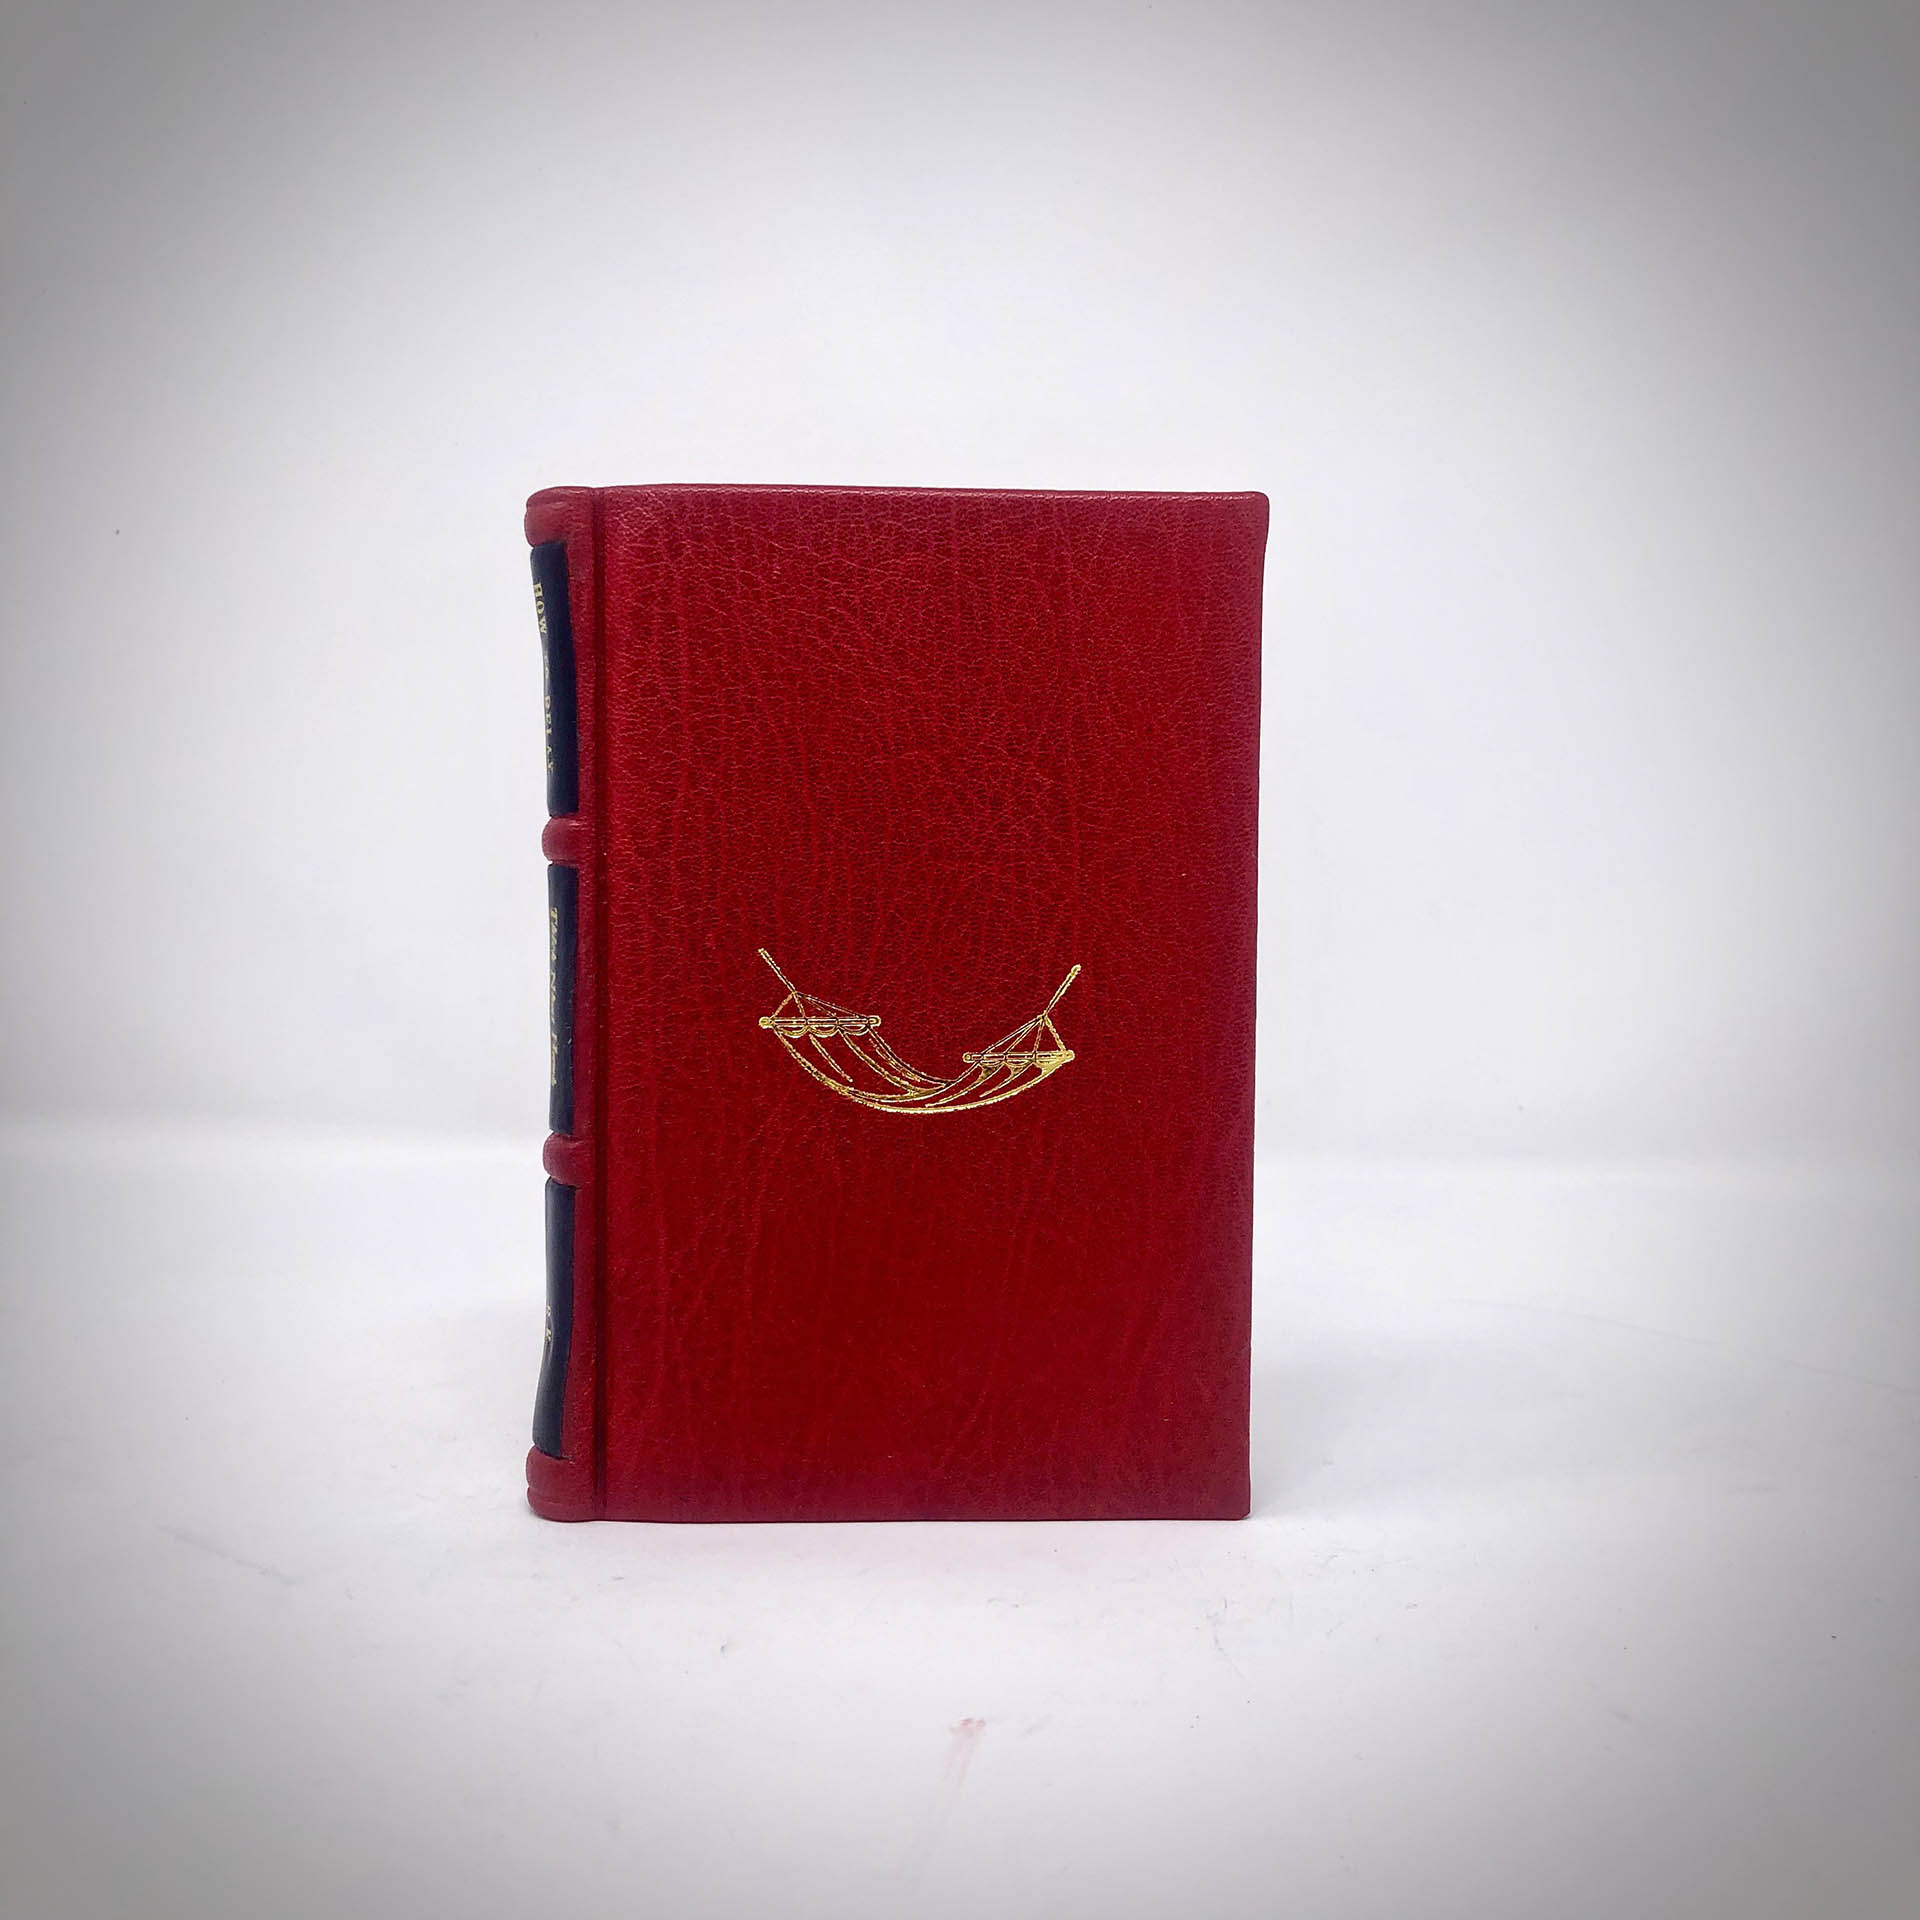 Boston Harbor Bookbindery
www.bostonharborbooks.com

How to Relax; Custom red leather book, designed and executed for the client’s personal library as one fo their all-time favorite books.